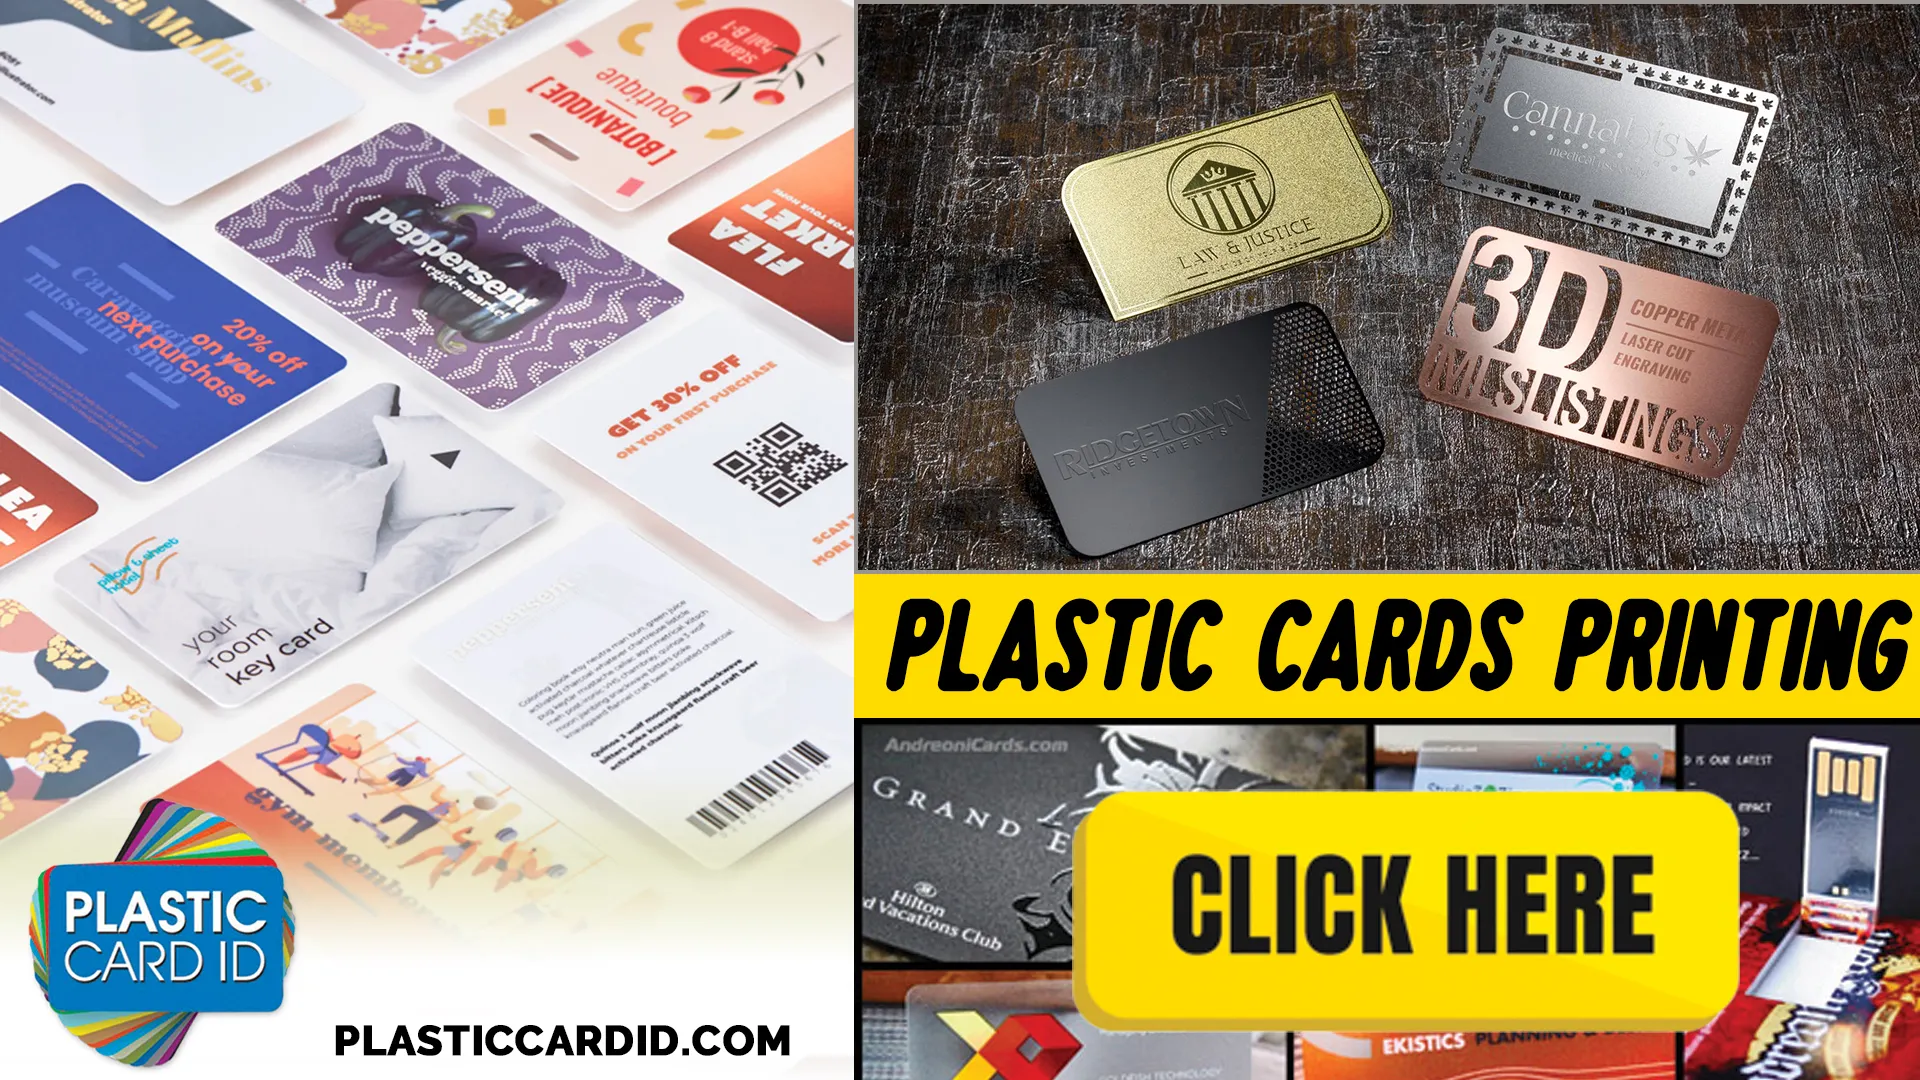 Our Cards: A Gateway to Digital Buzz